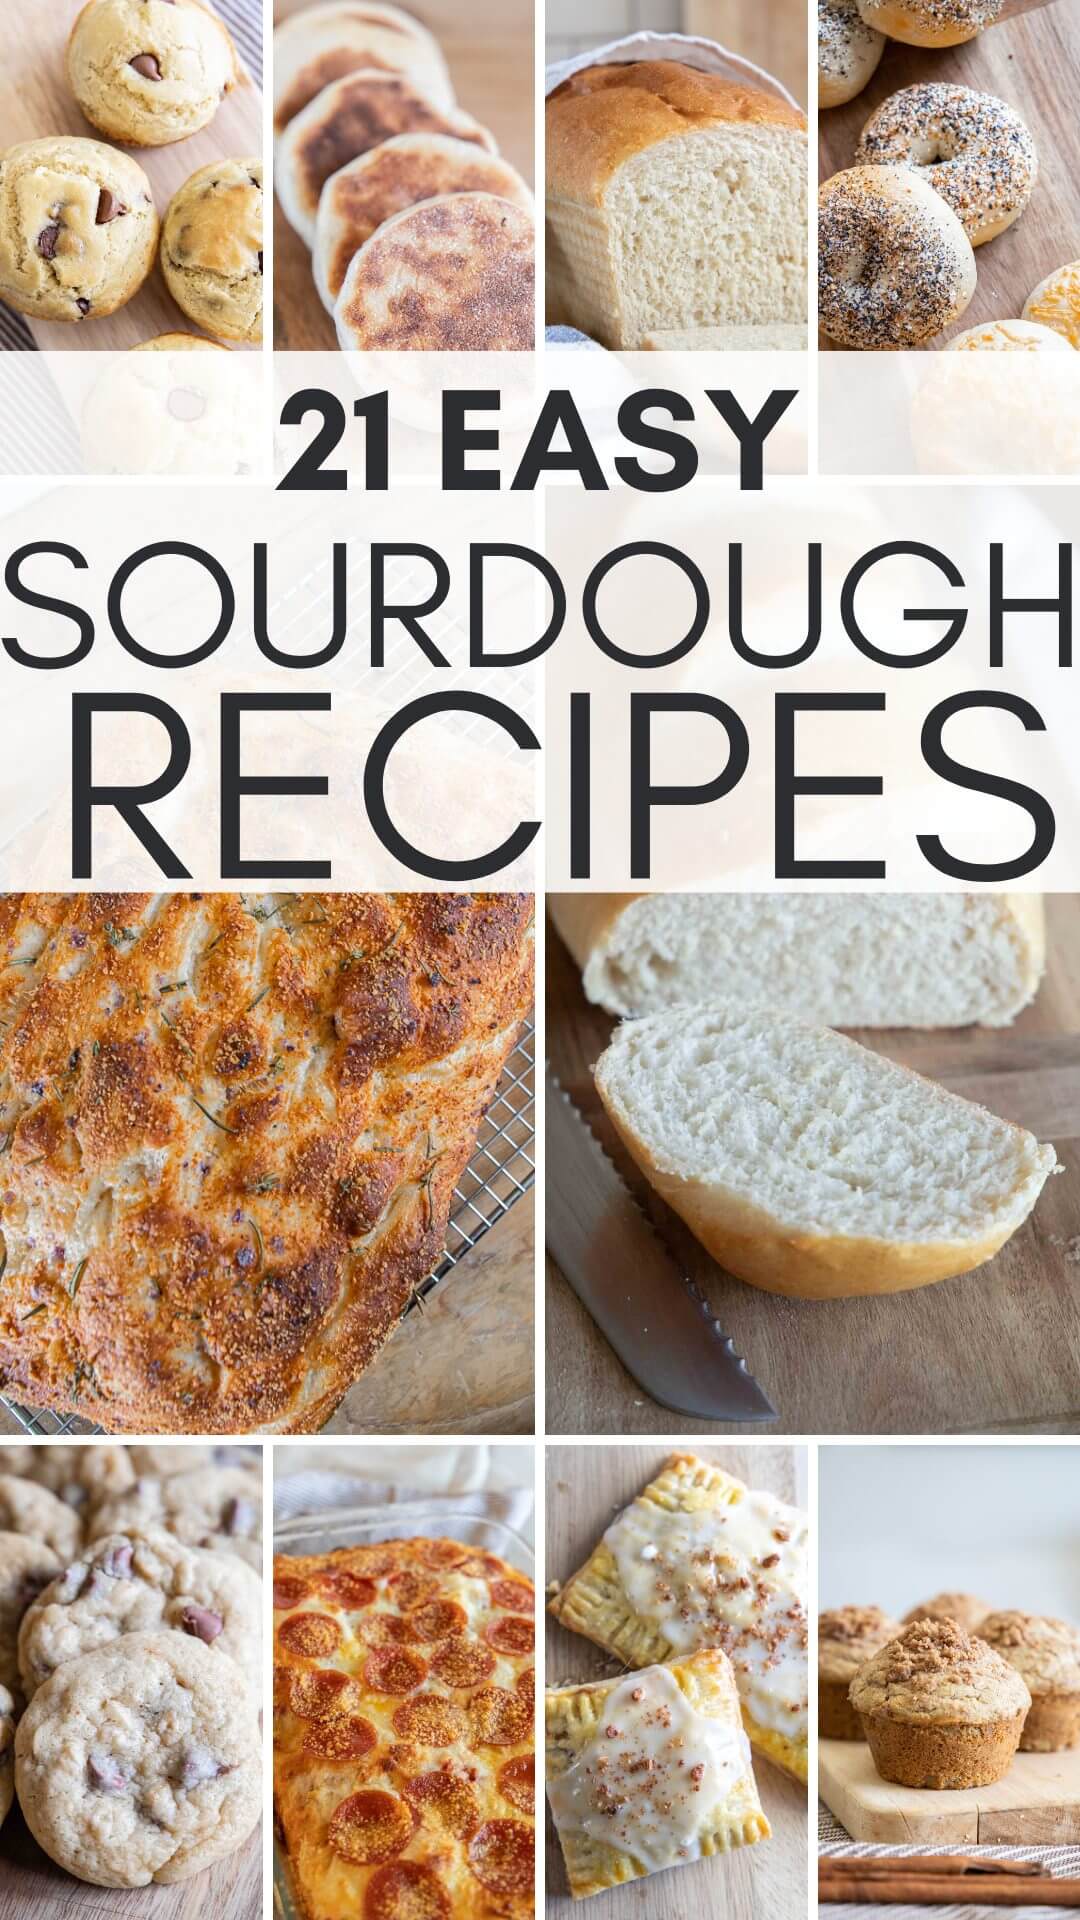 21 amazing sourdough recipes perfect for beginners and seasoned sourdough bakers! These are all great recipes to add to your collection.